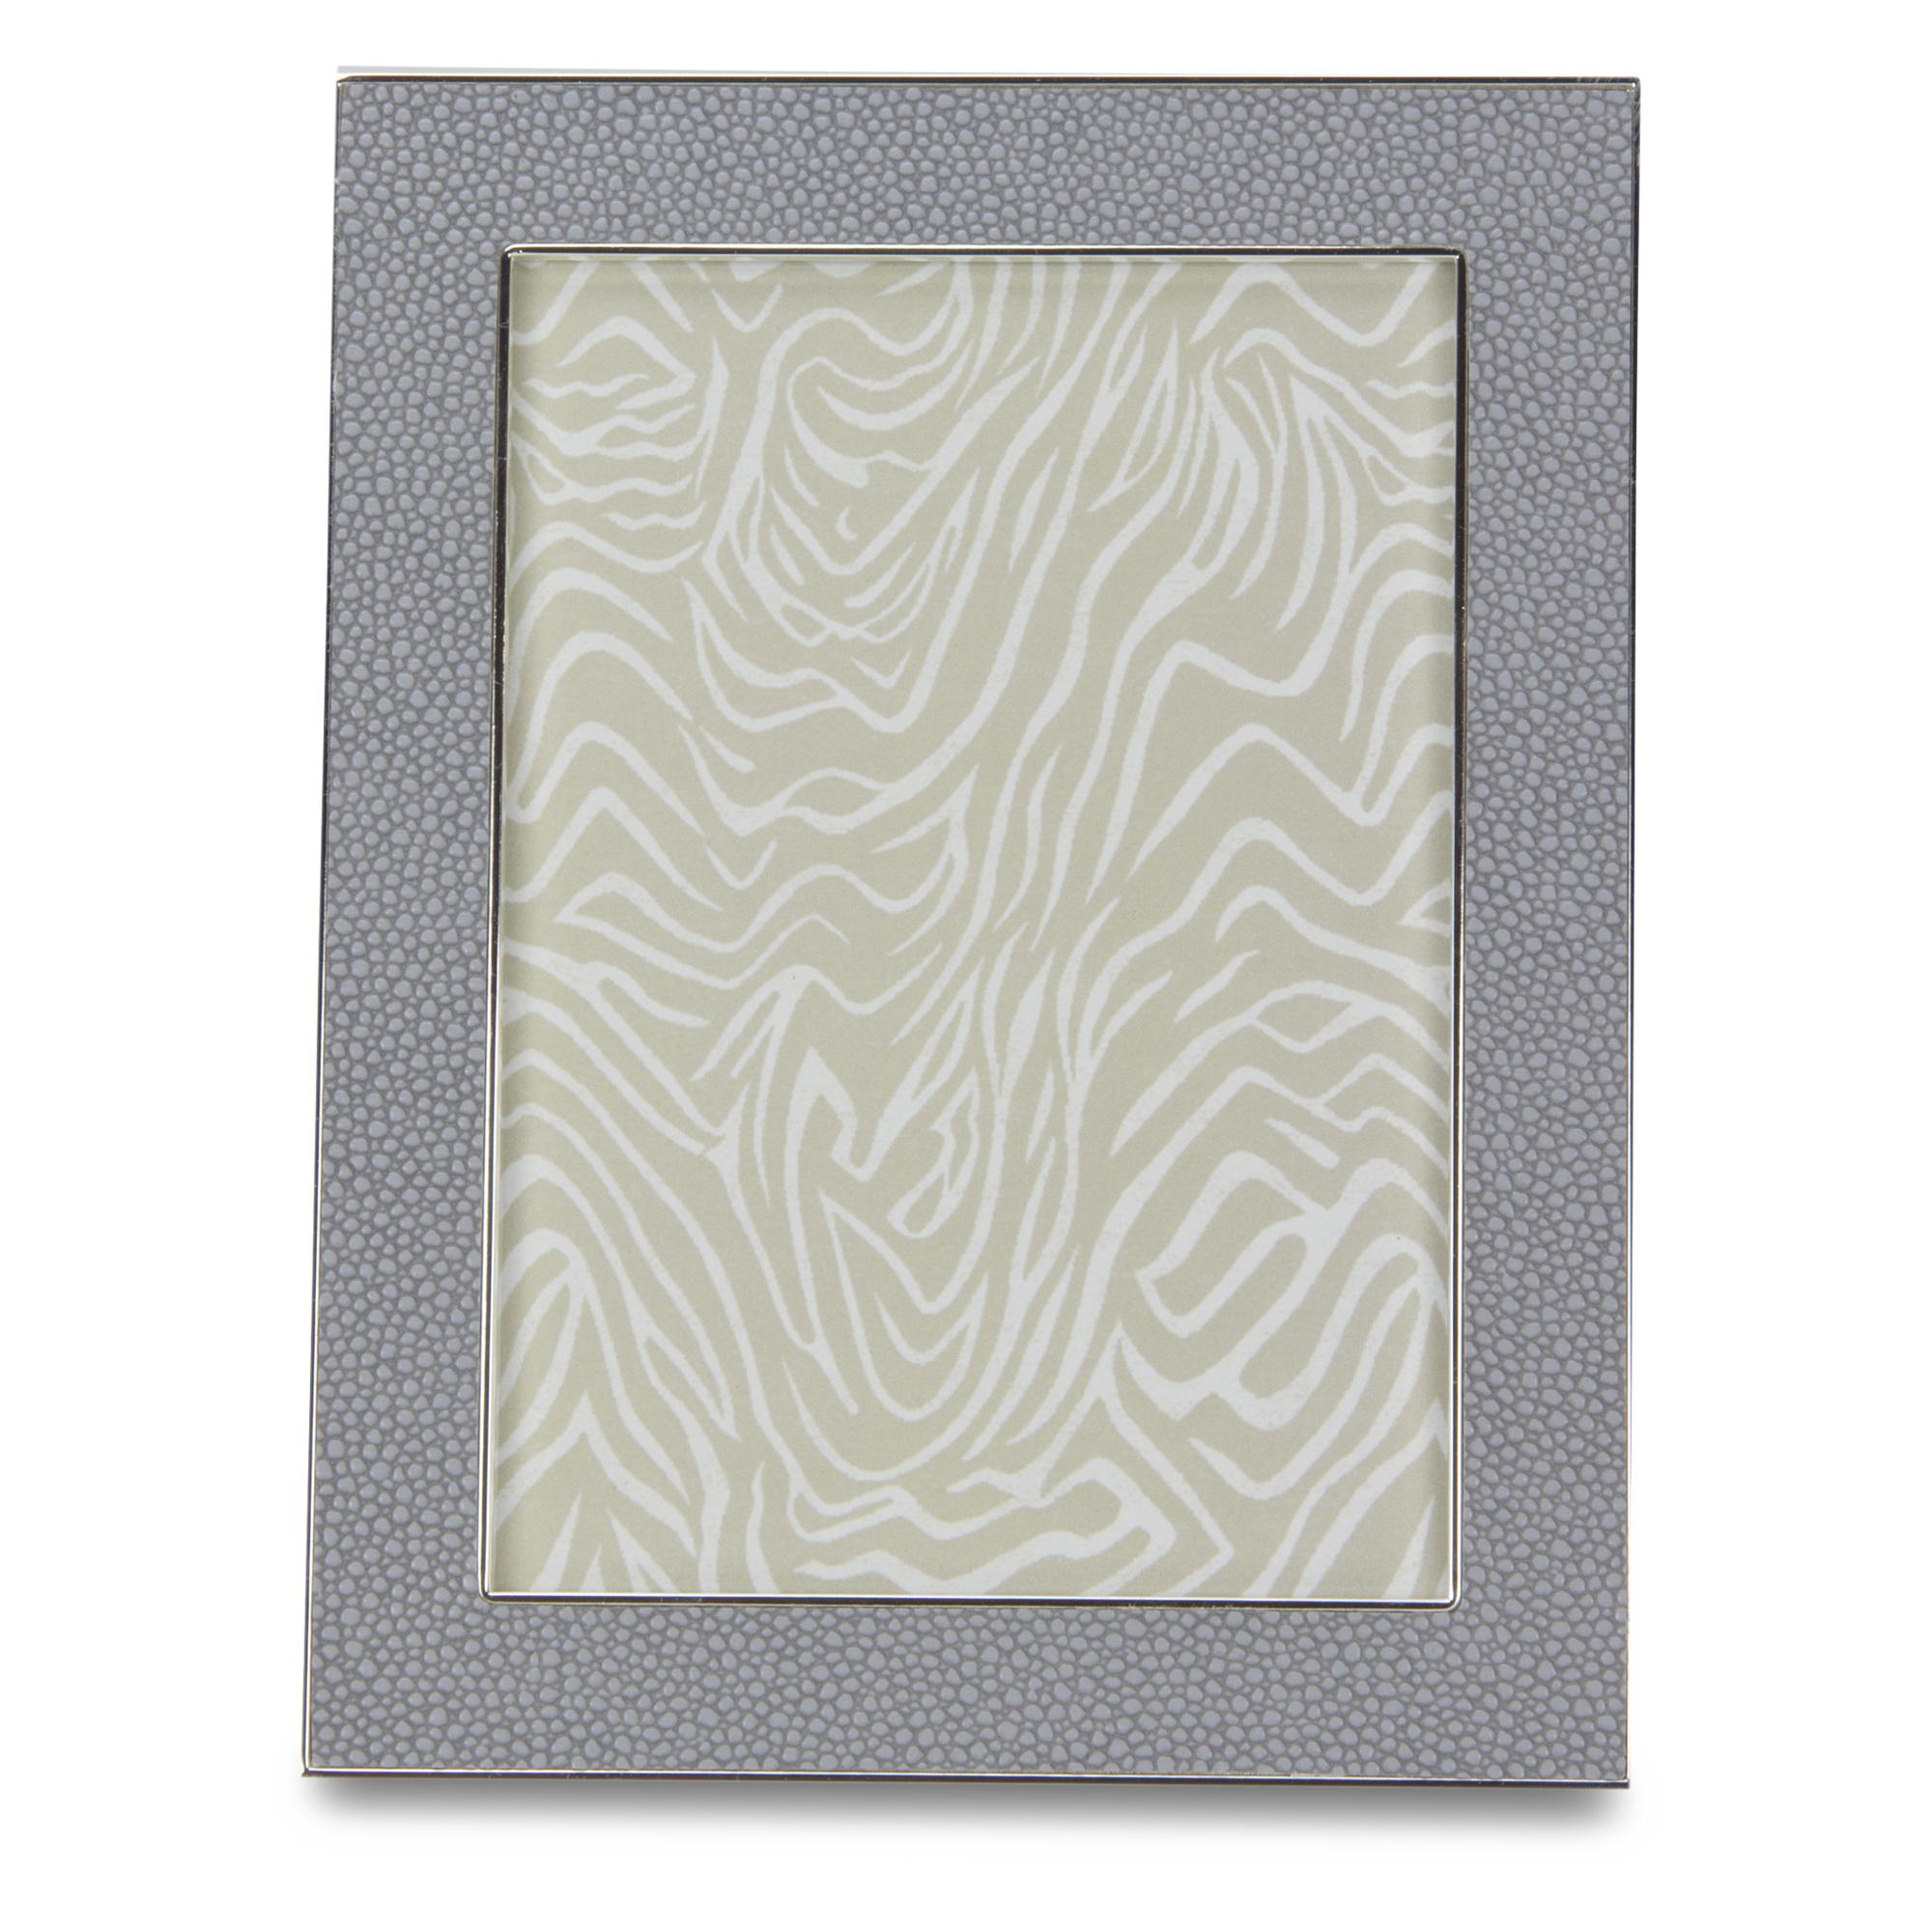 A gorgeous grey faux shagreen picture frame capable of blending in with various décor styles.